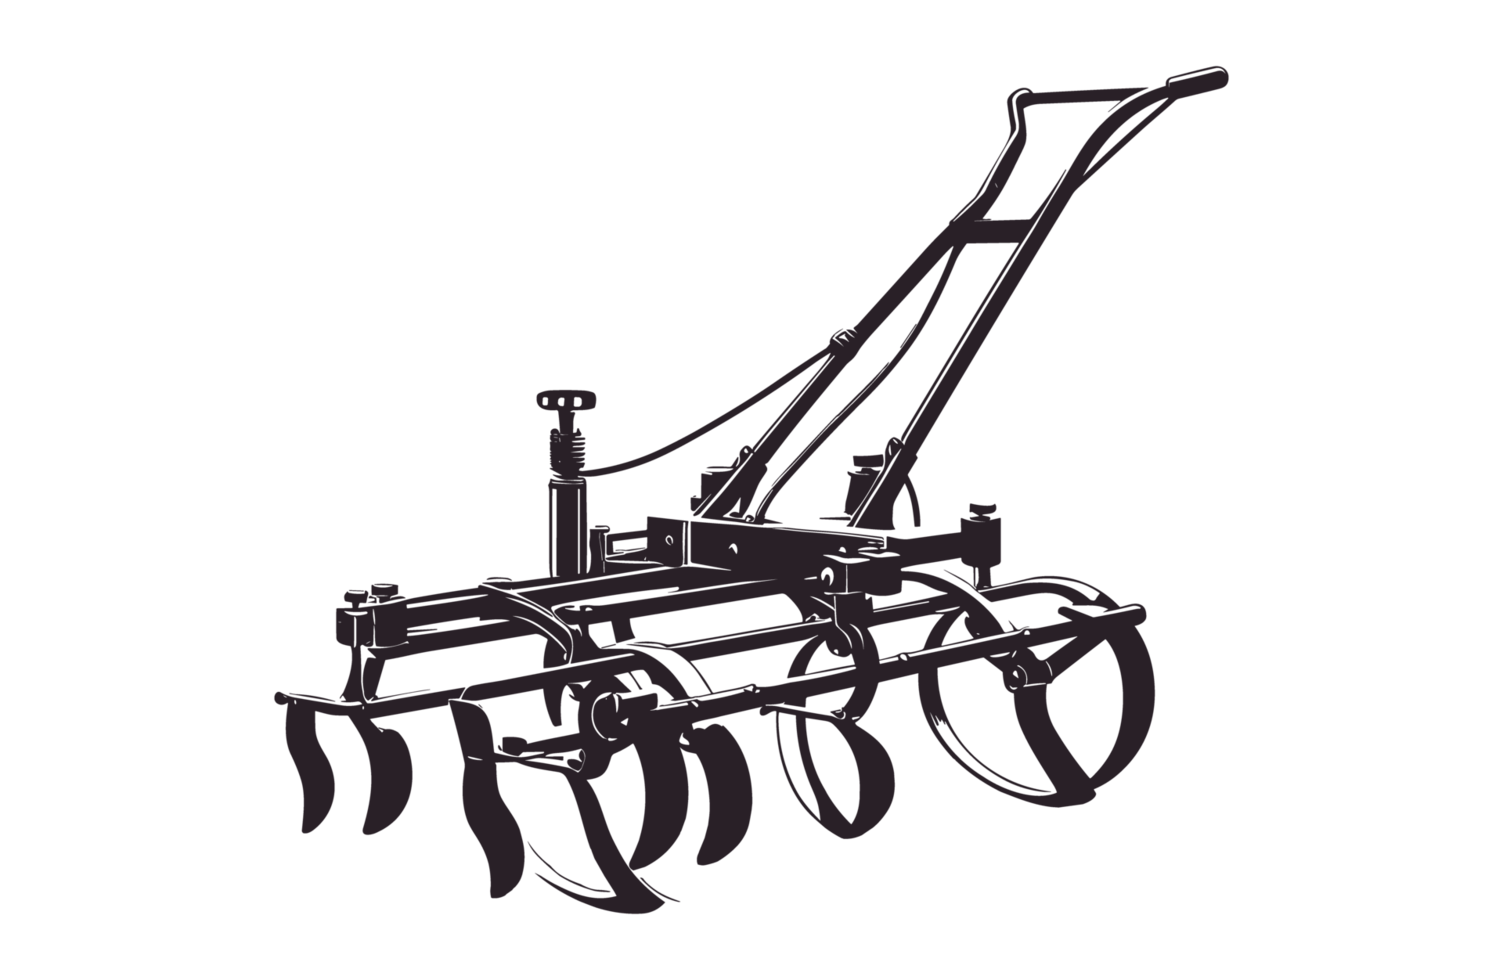 Cultivator Farm Tools Illustration Silhouette PNG File